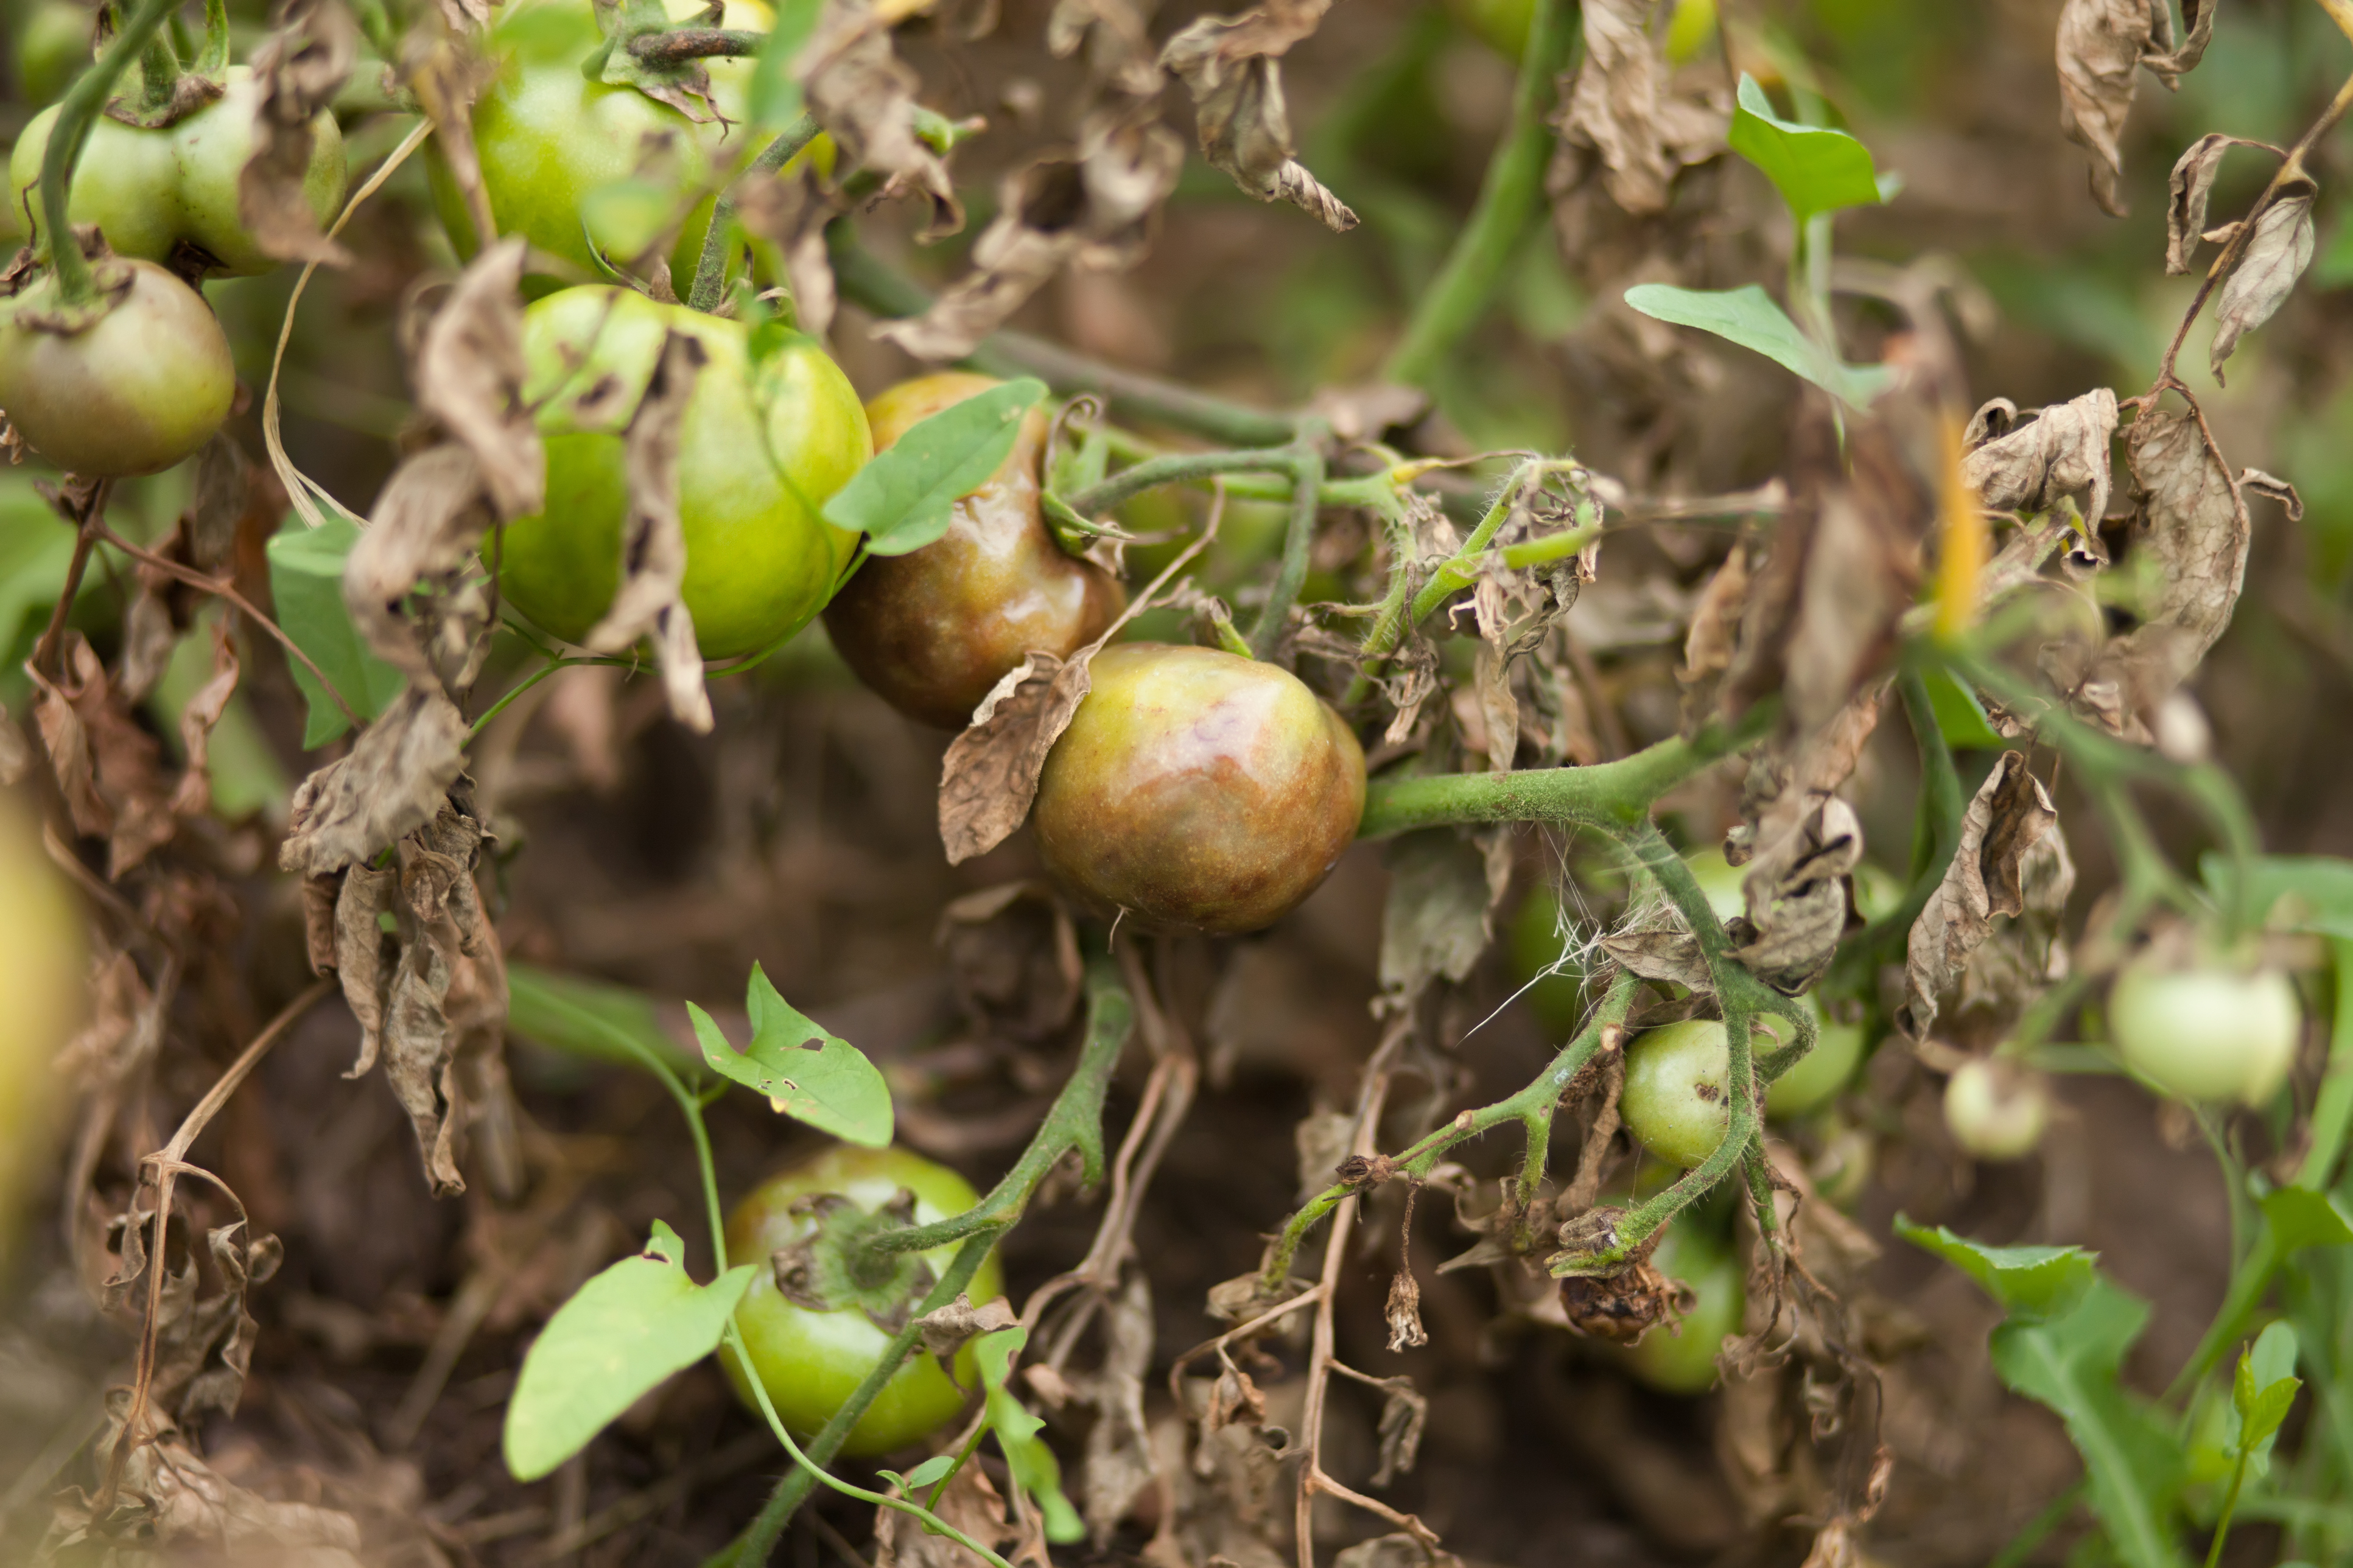 tomatoes suffering with blight (Thinkstock/PA)